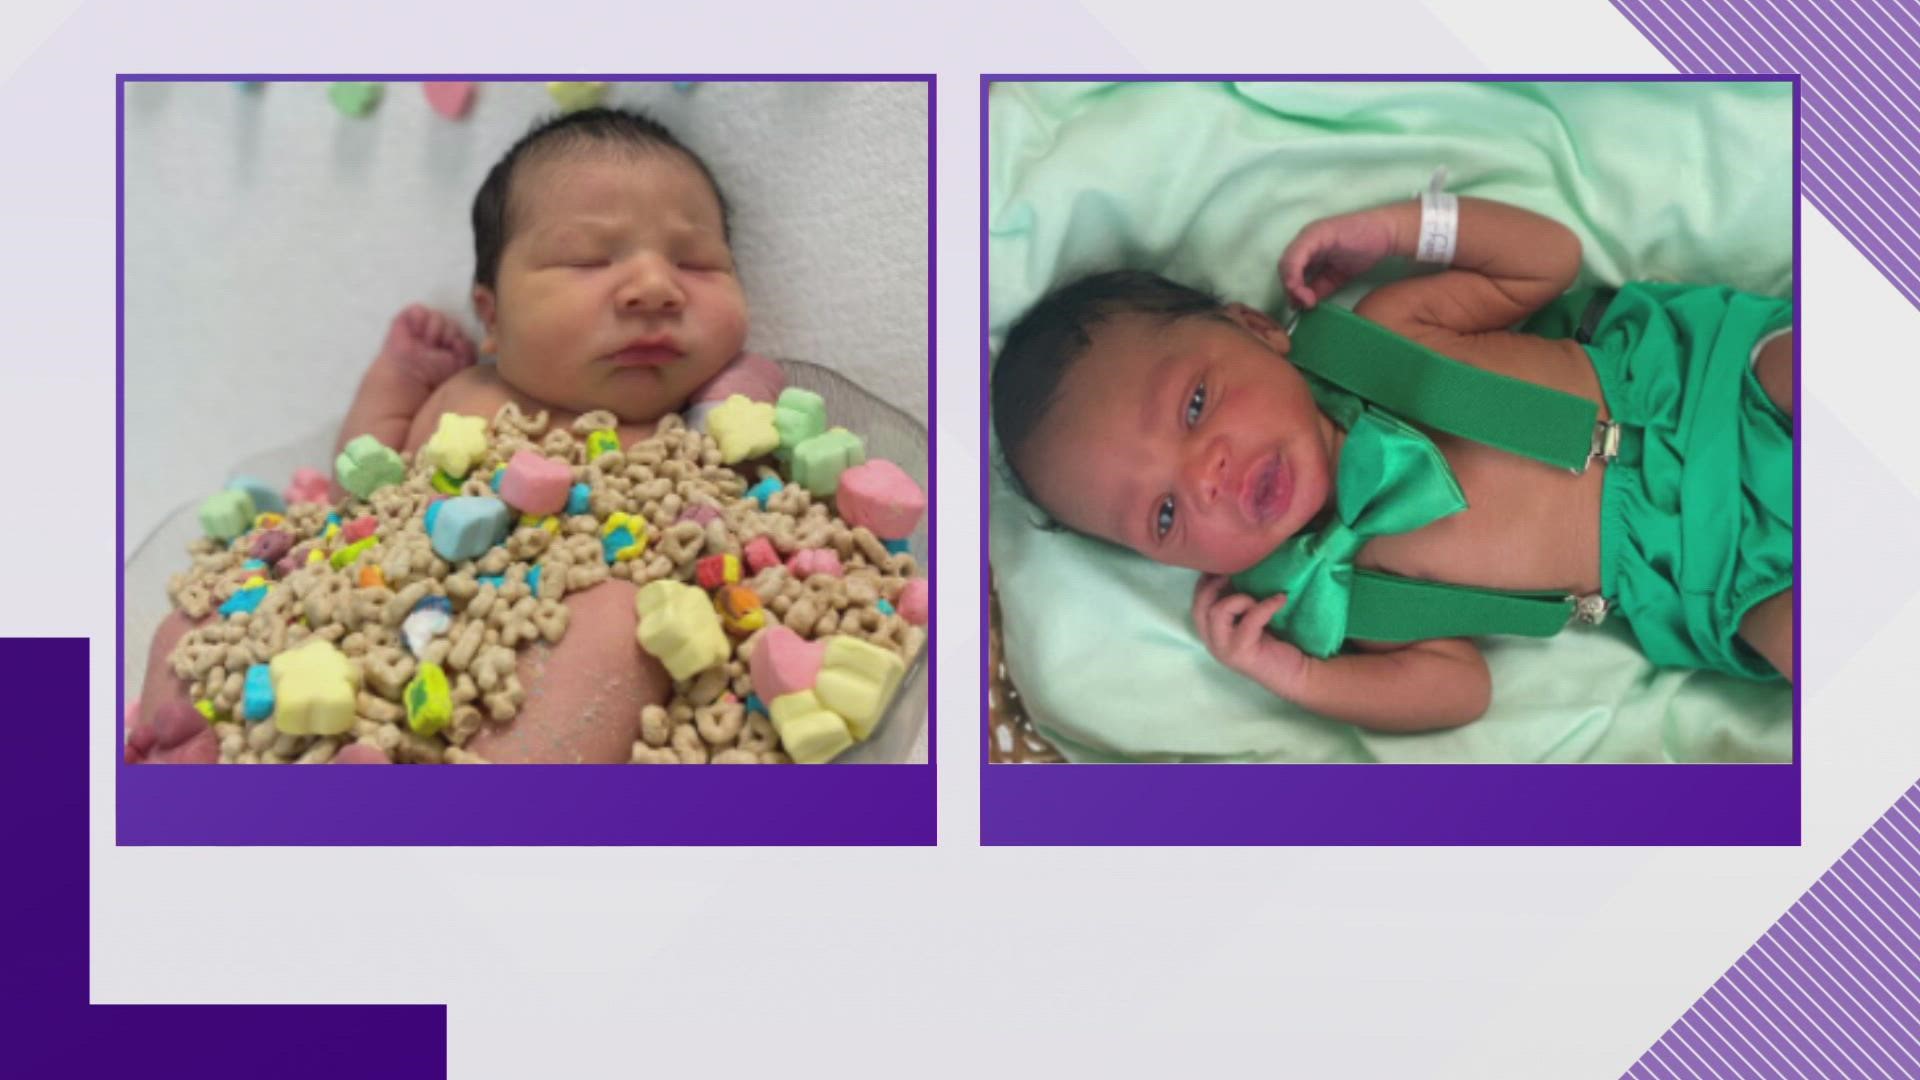 The nurses at the St. Francis Hospital-Memphis created a St. Paddy’s Day photo shoot for the newborns.